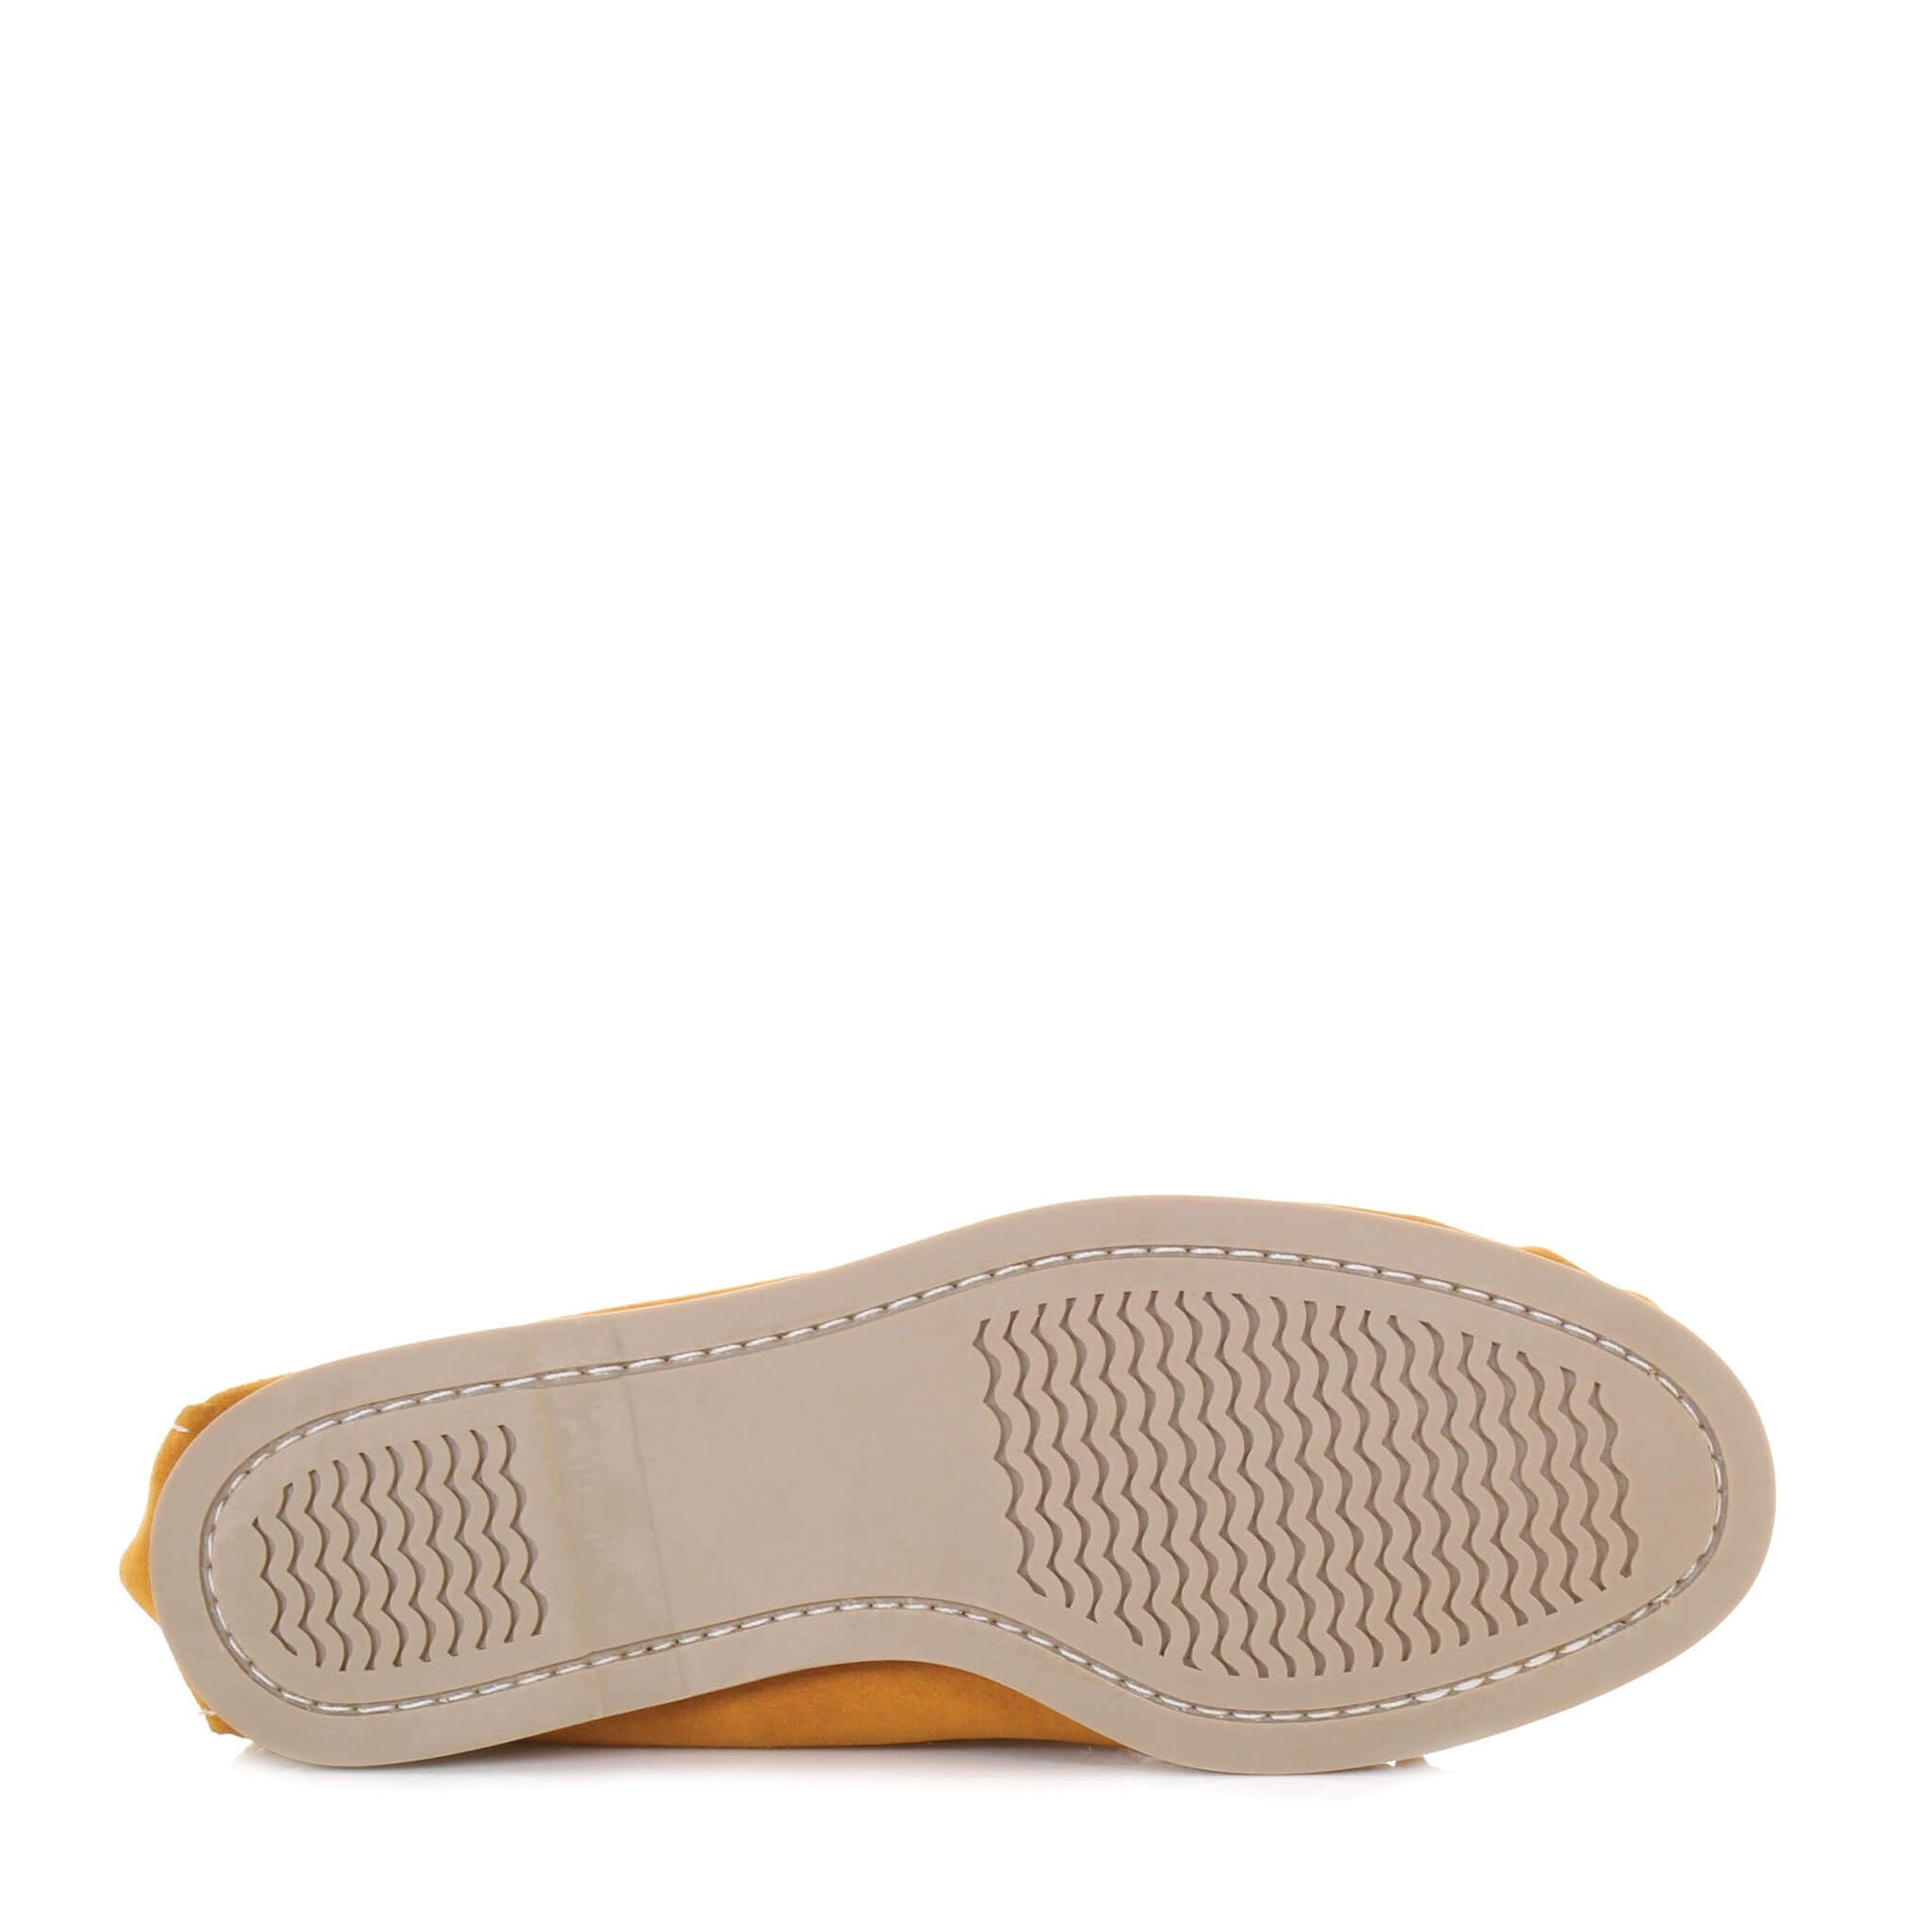 Canada Mocc Tan Moccasin for Women